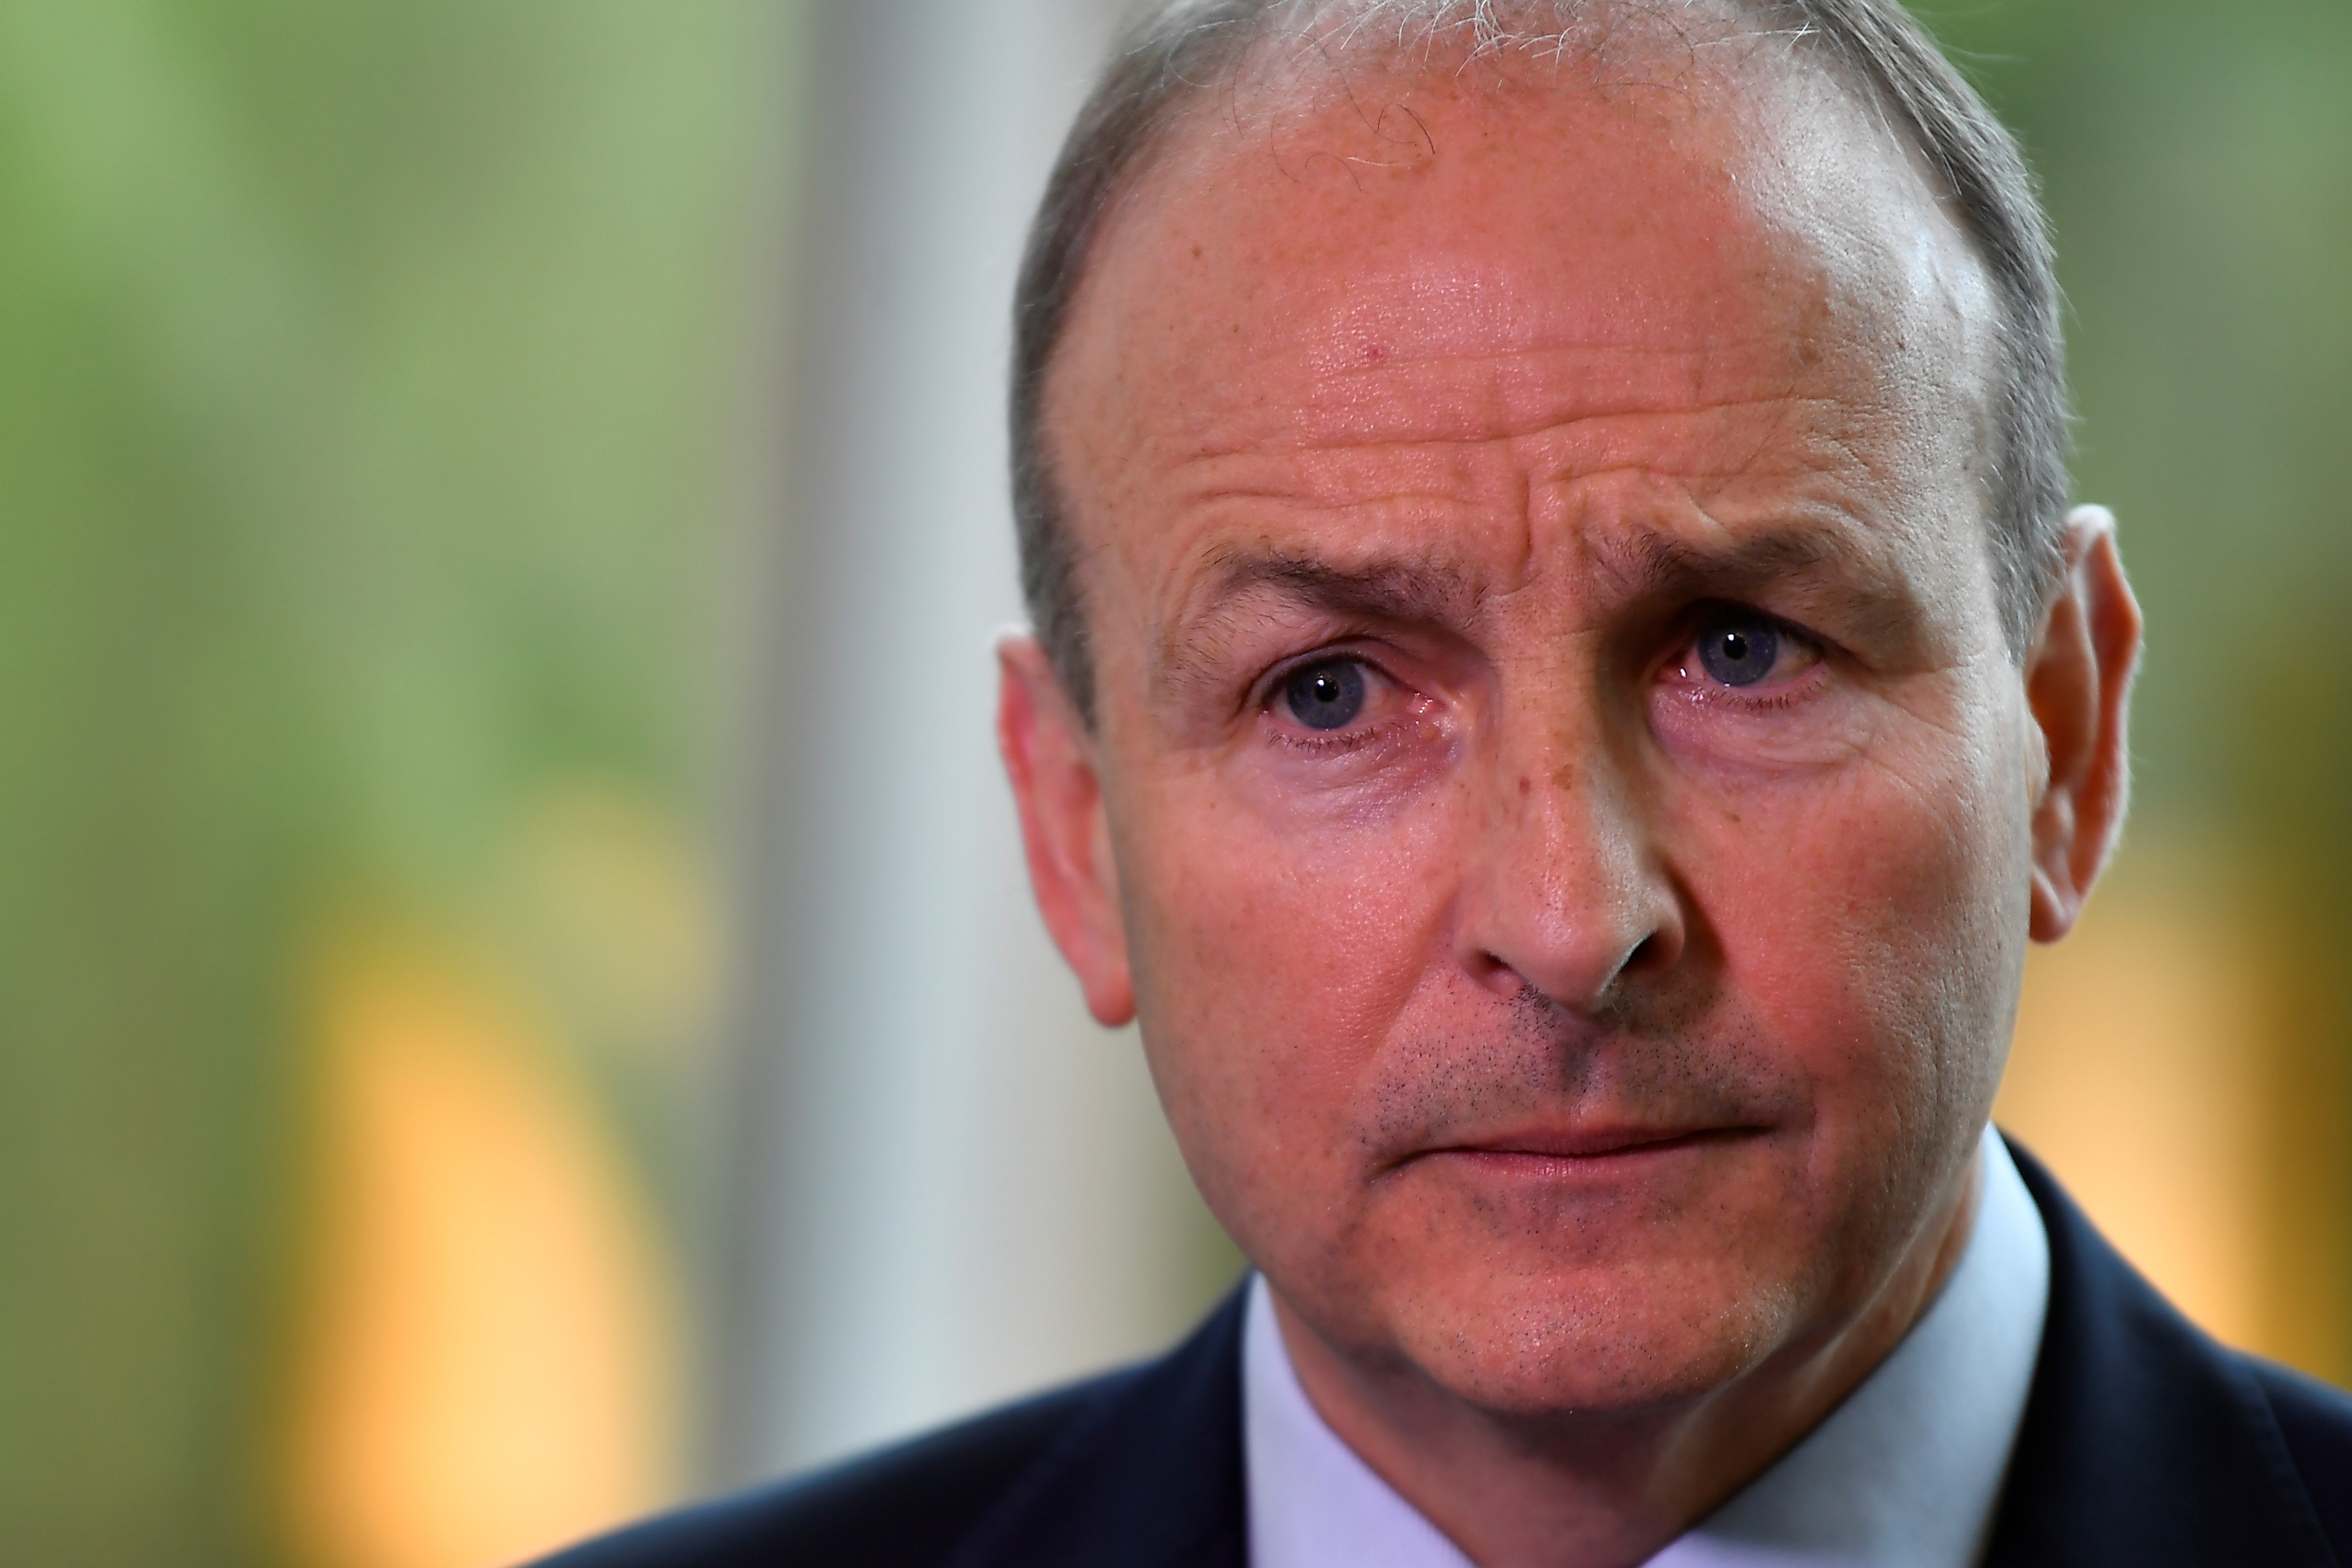 Taoiseach Micheal Martin speaks to Northern Ireland party leaders, in Belfast